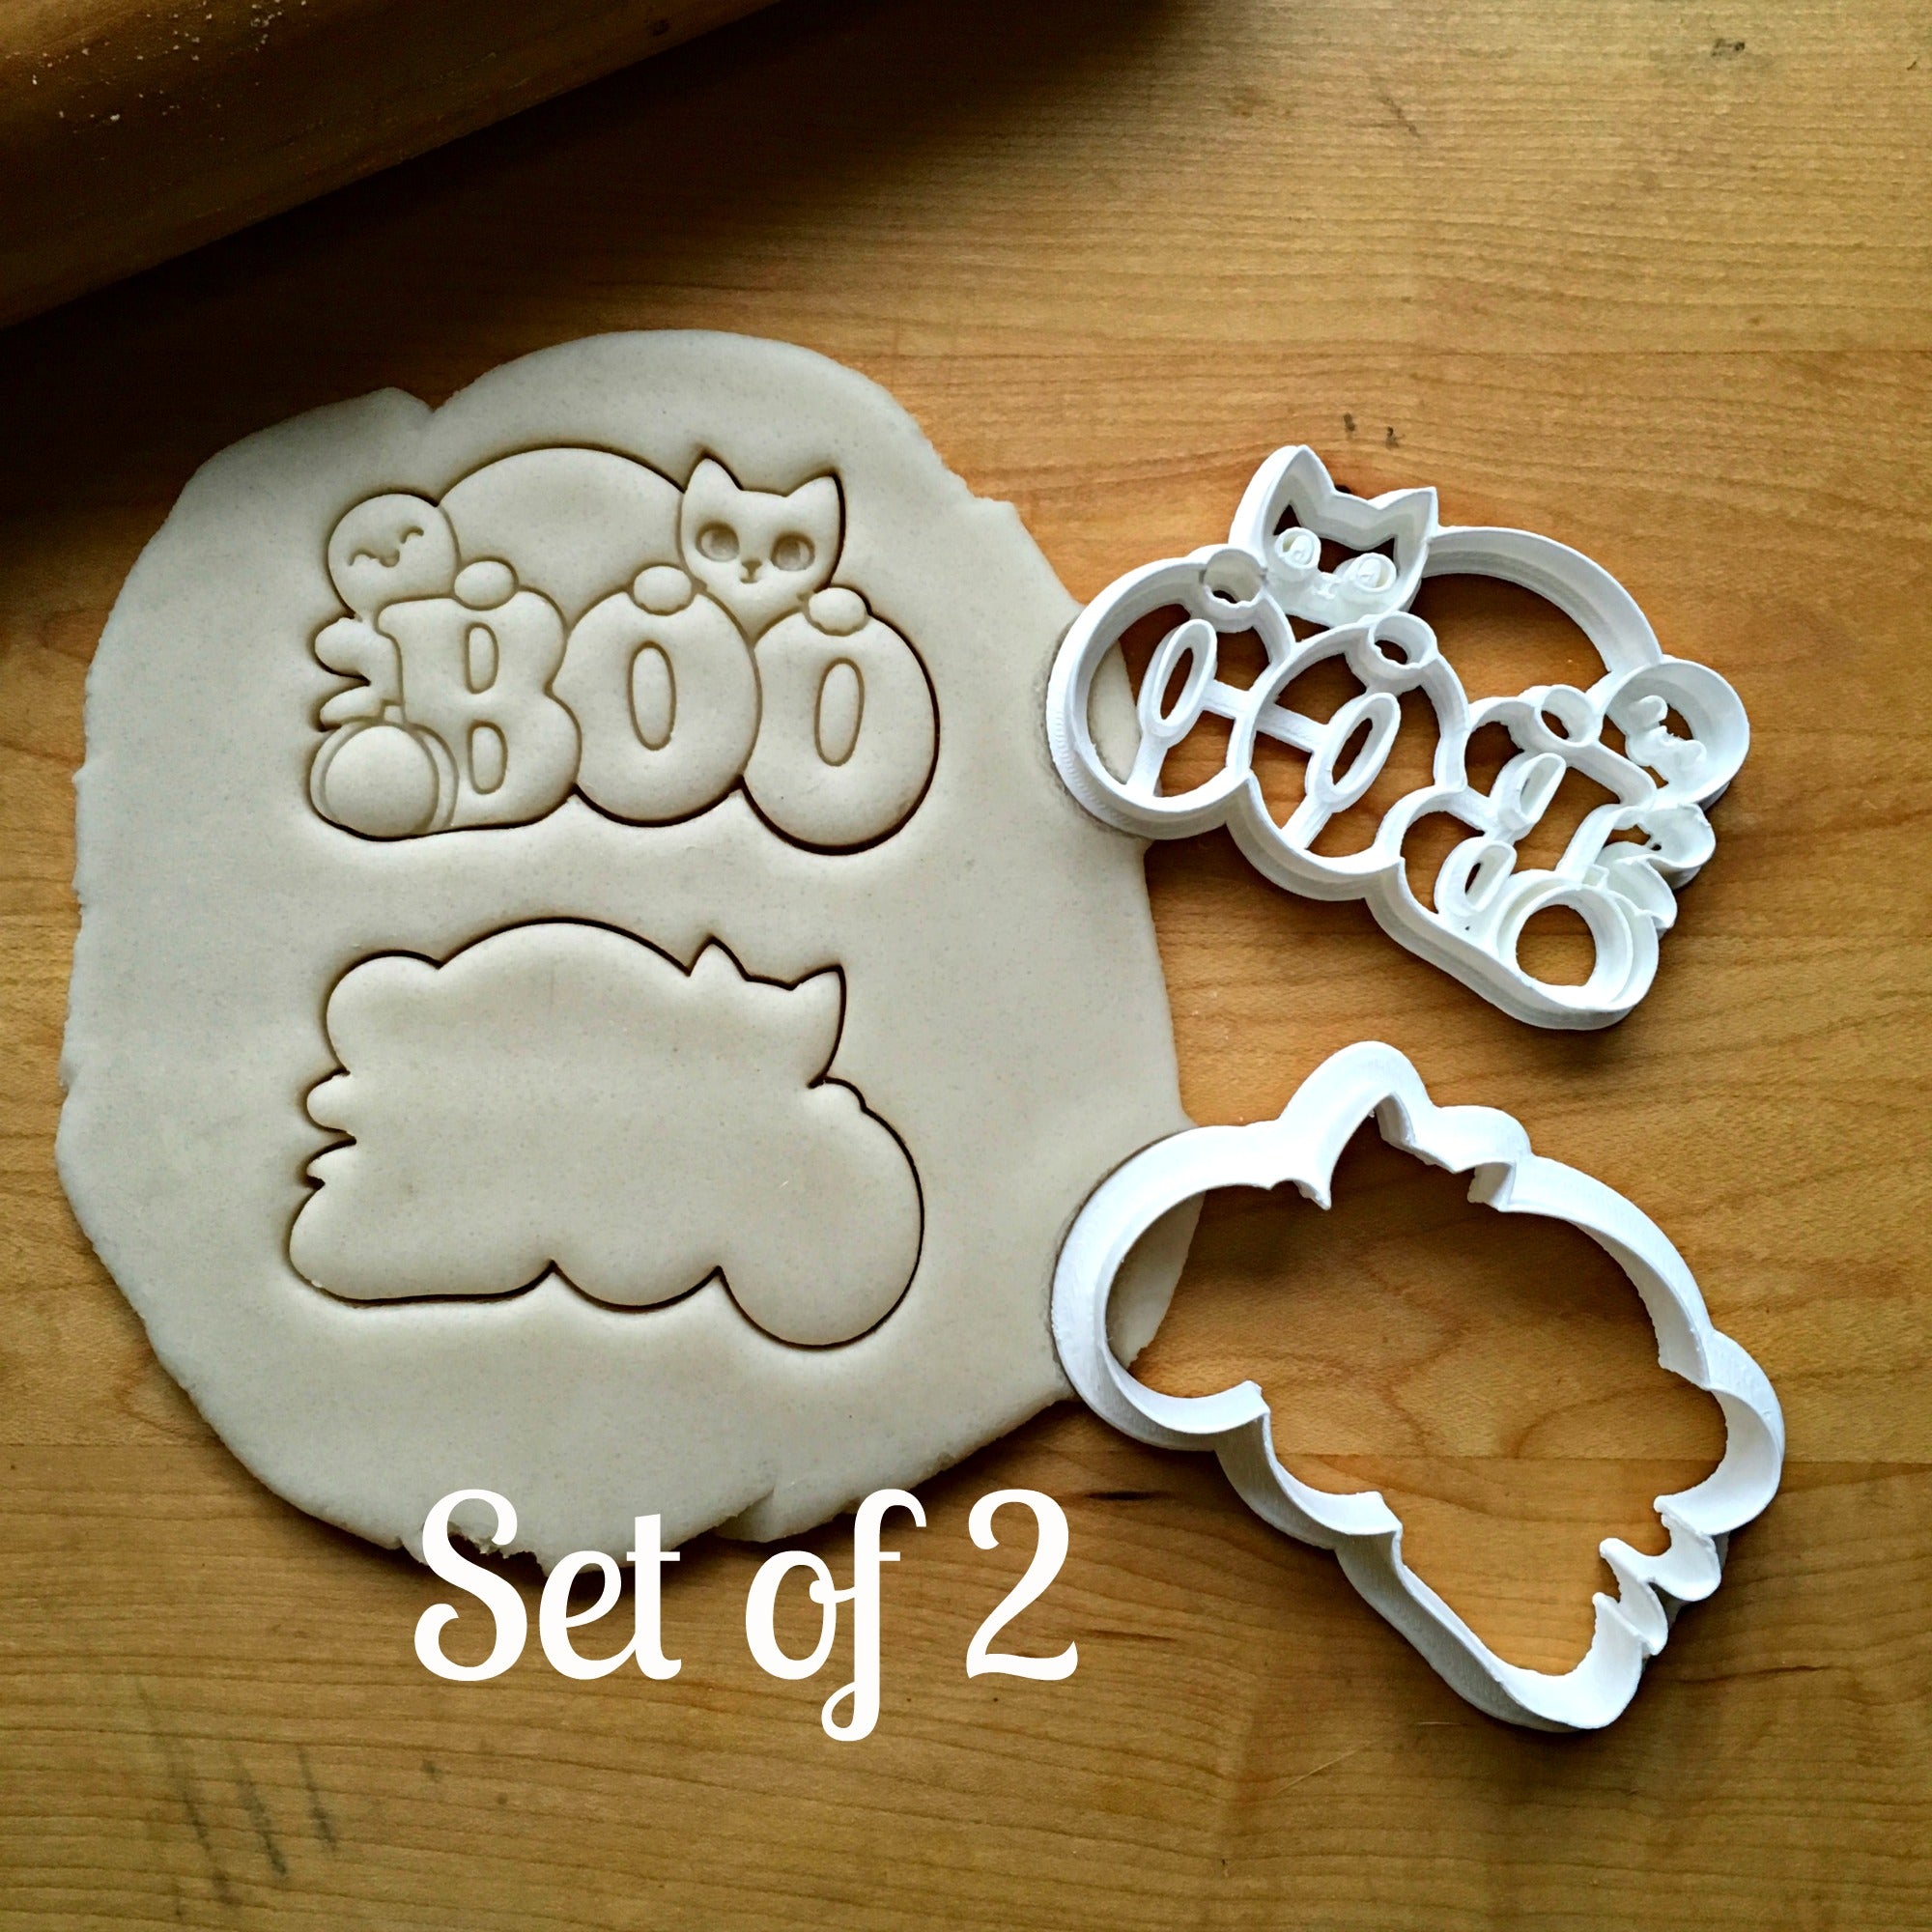 Set of 2 Cute Boo Cookie Cutters/Dishwasher Safe